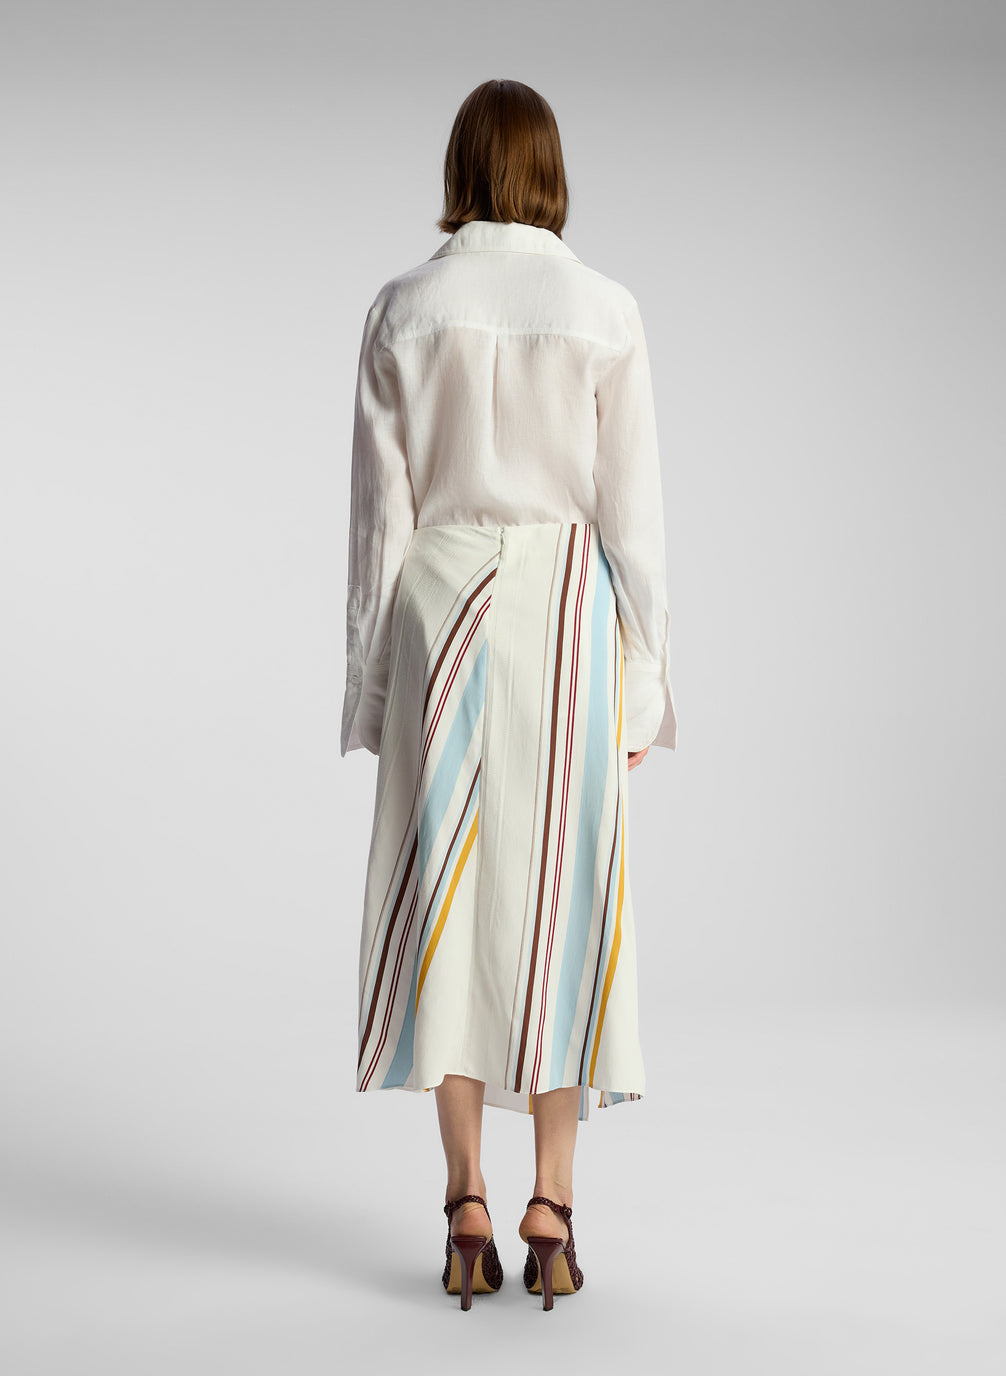 back view of woman wearing white button down shirt and multicolor striped skirt